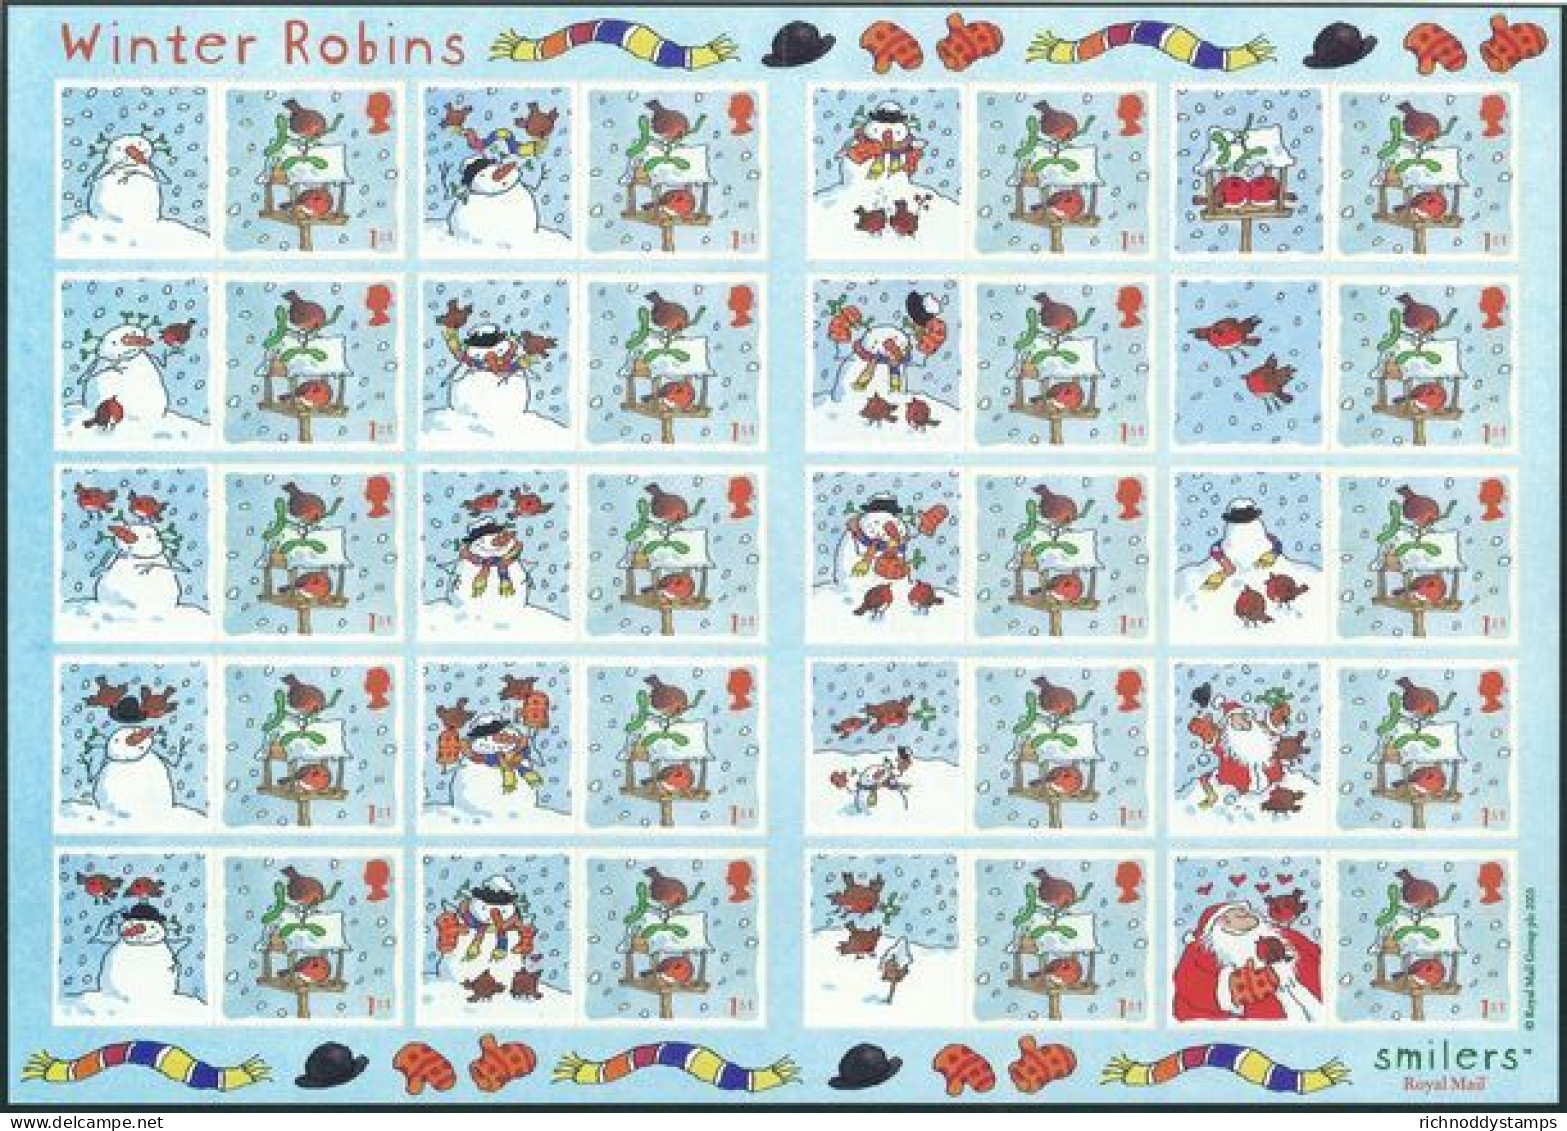 2003 Winter Robins Smilers Sheet Unmounted Mint.  - Timbres Personnalisés